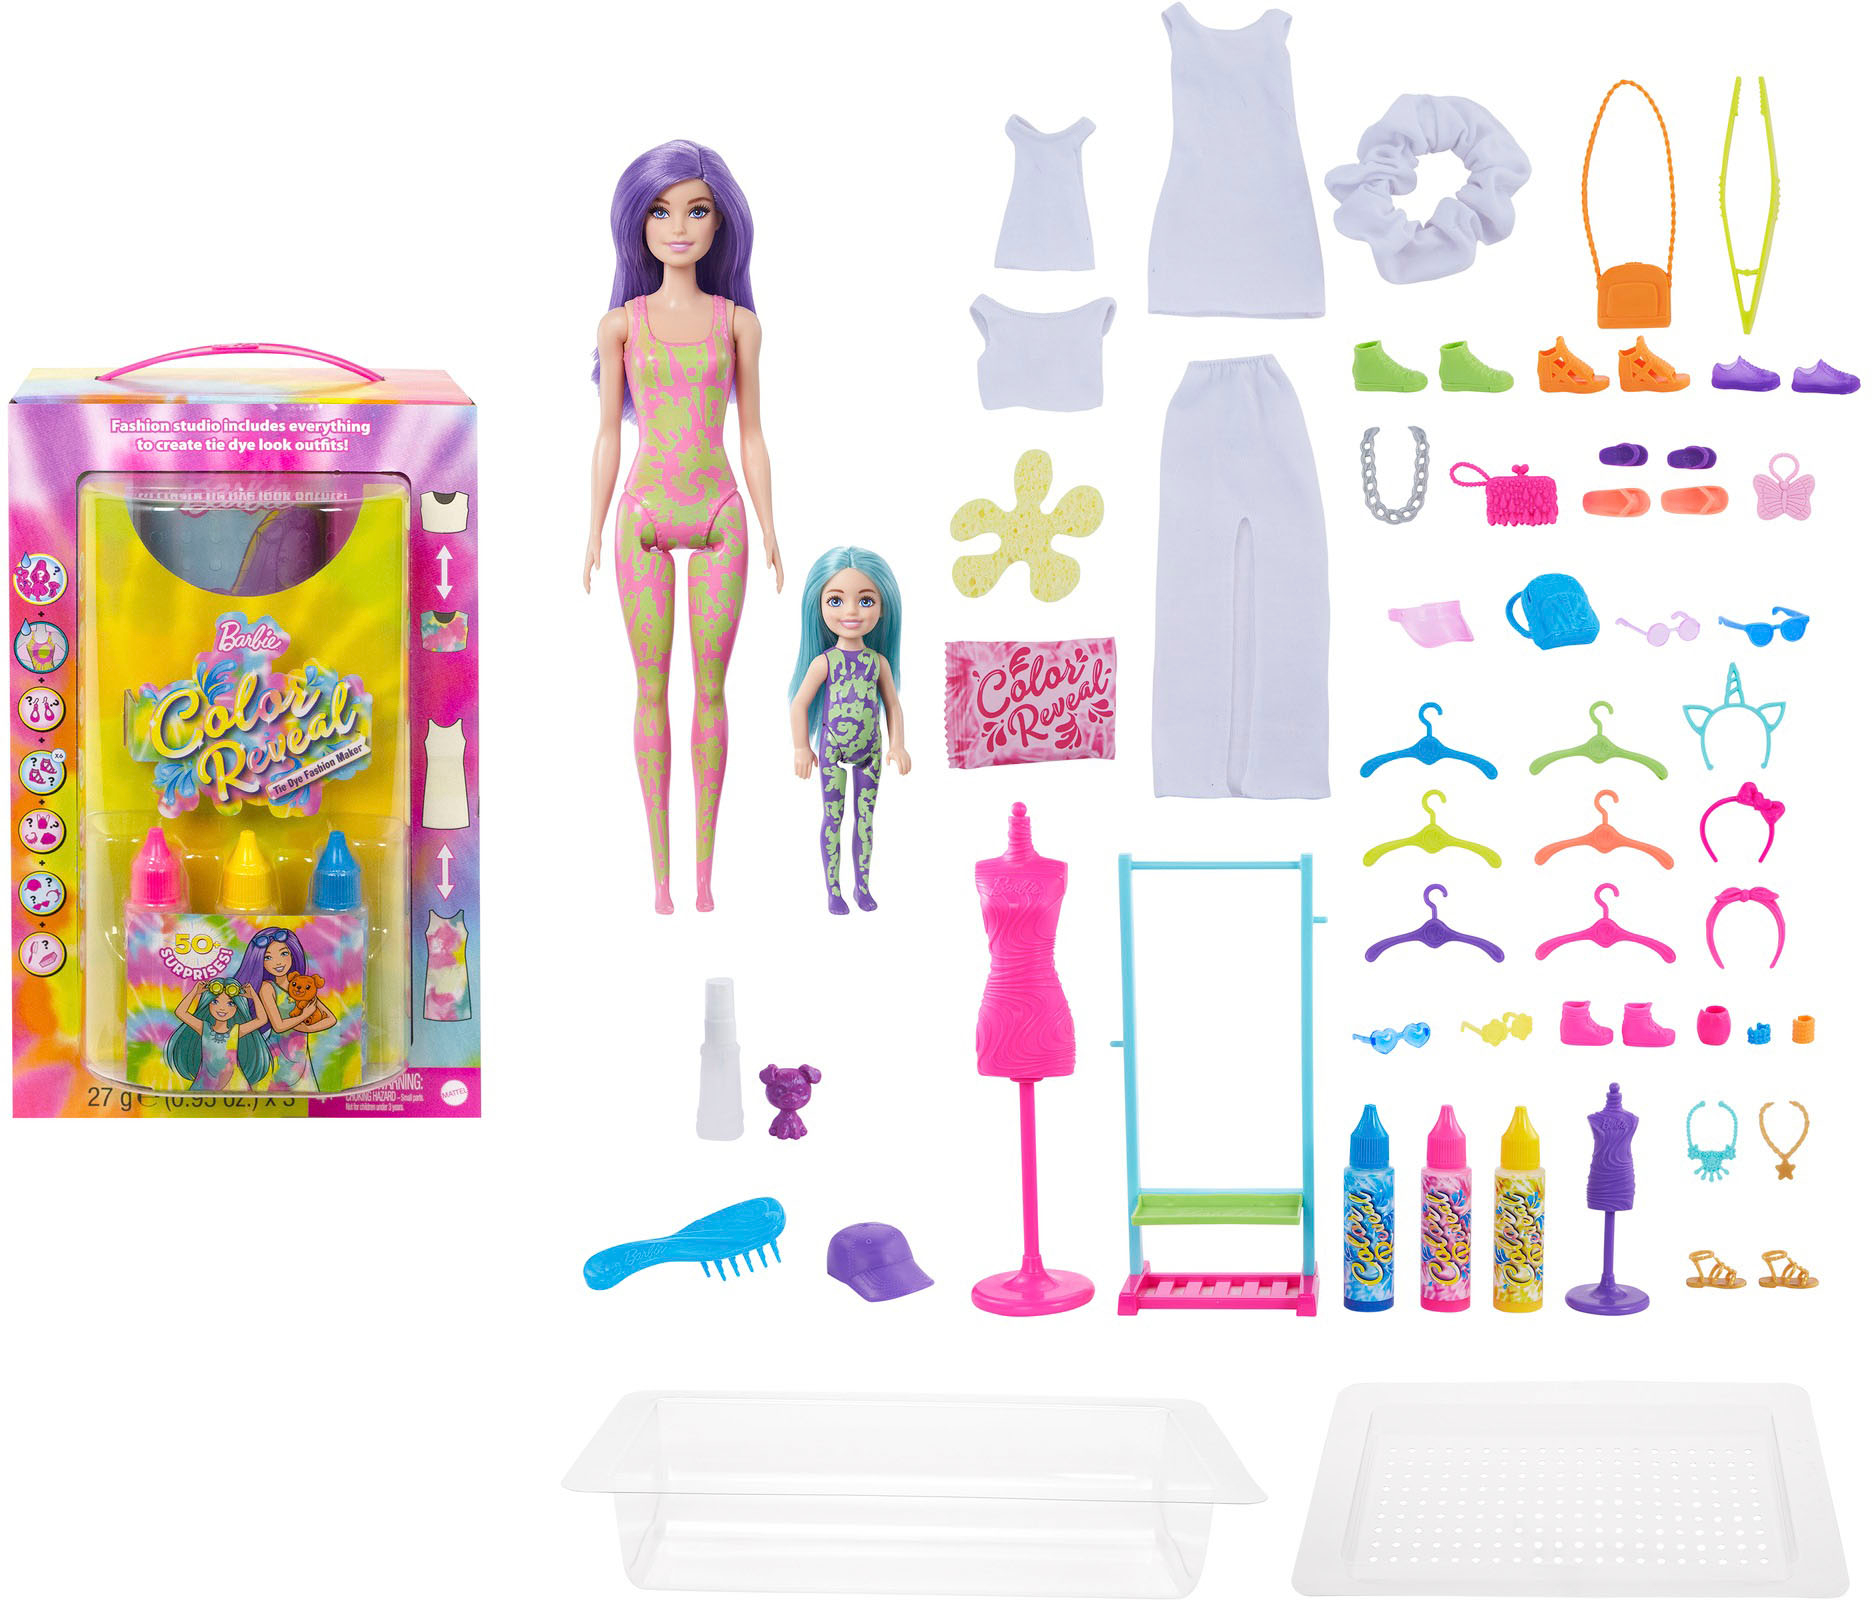 Angle View: Barbie - Color Reveal Tie Dye Fashion Maker with 2 Dolls